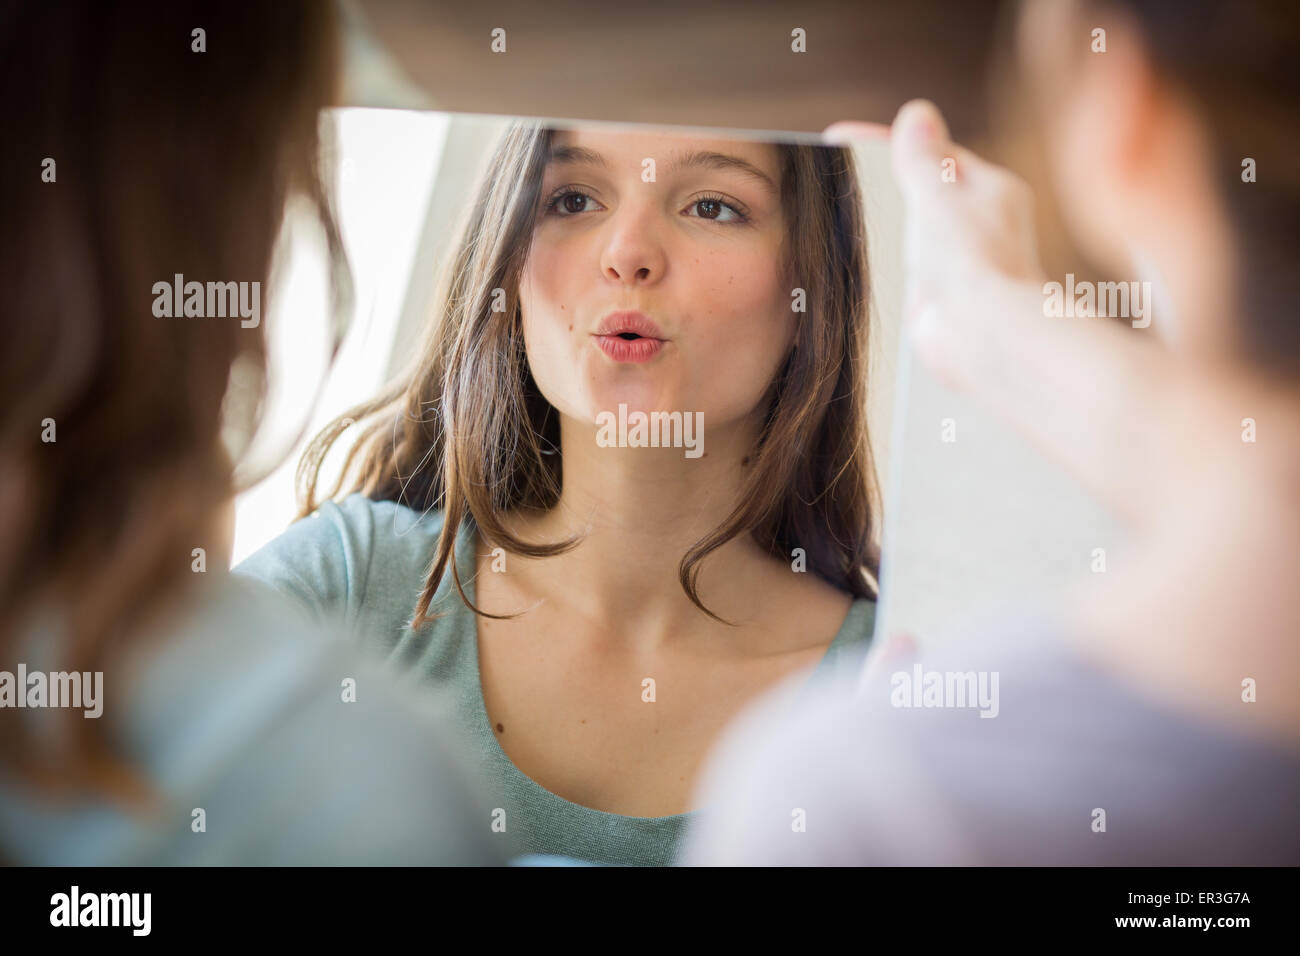 Treatment of stuttering : woman doing articulation and breathing exercises. Stock Photo